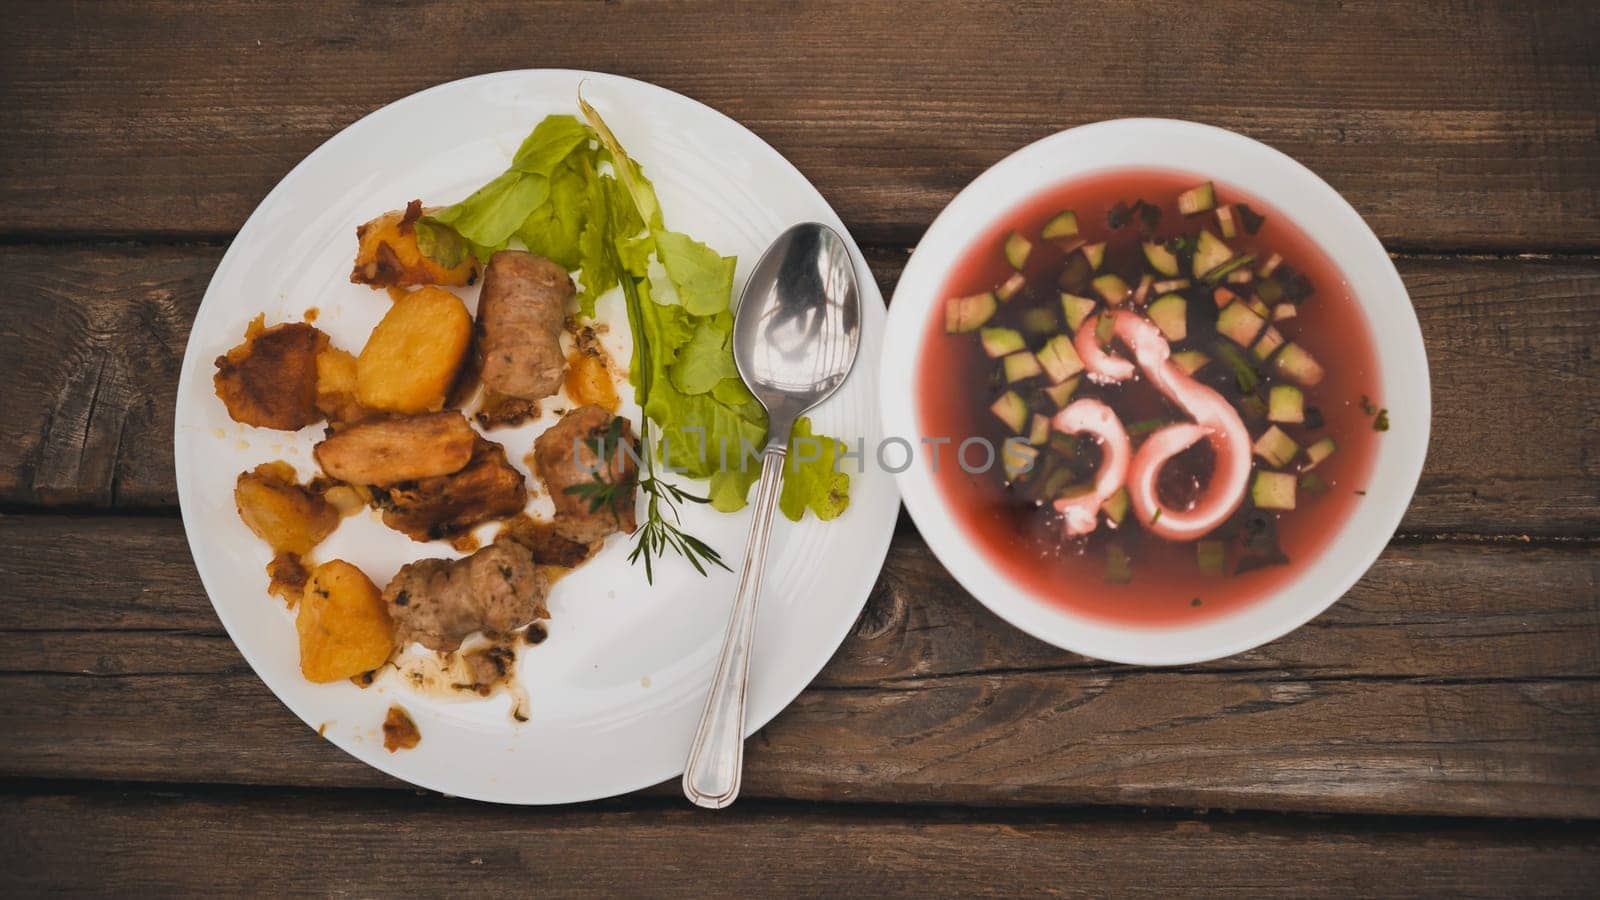 Roast potatoes with meat and red with borscht served for dinner